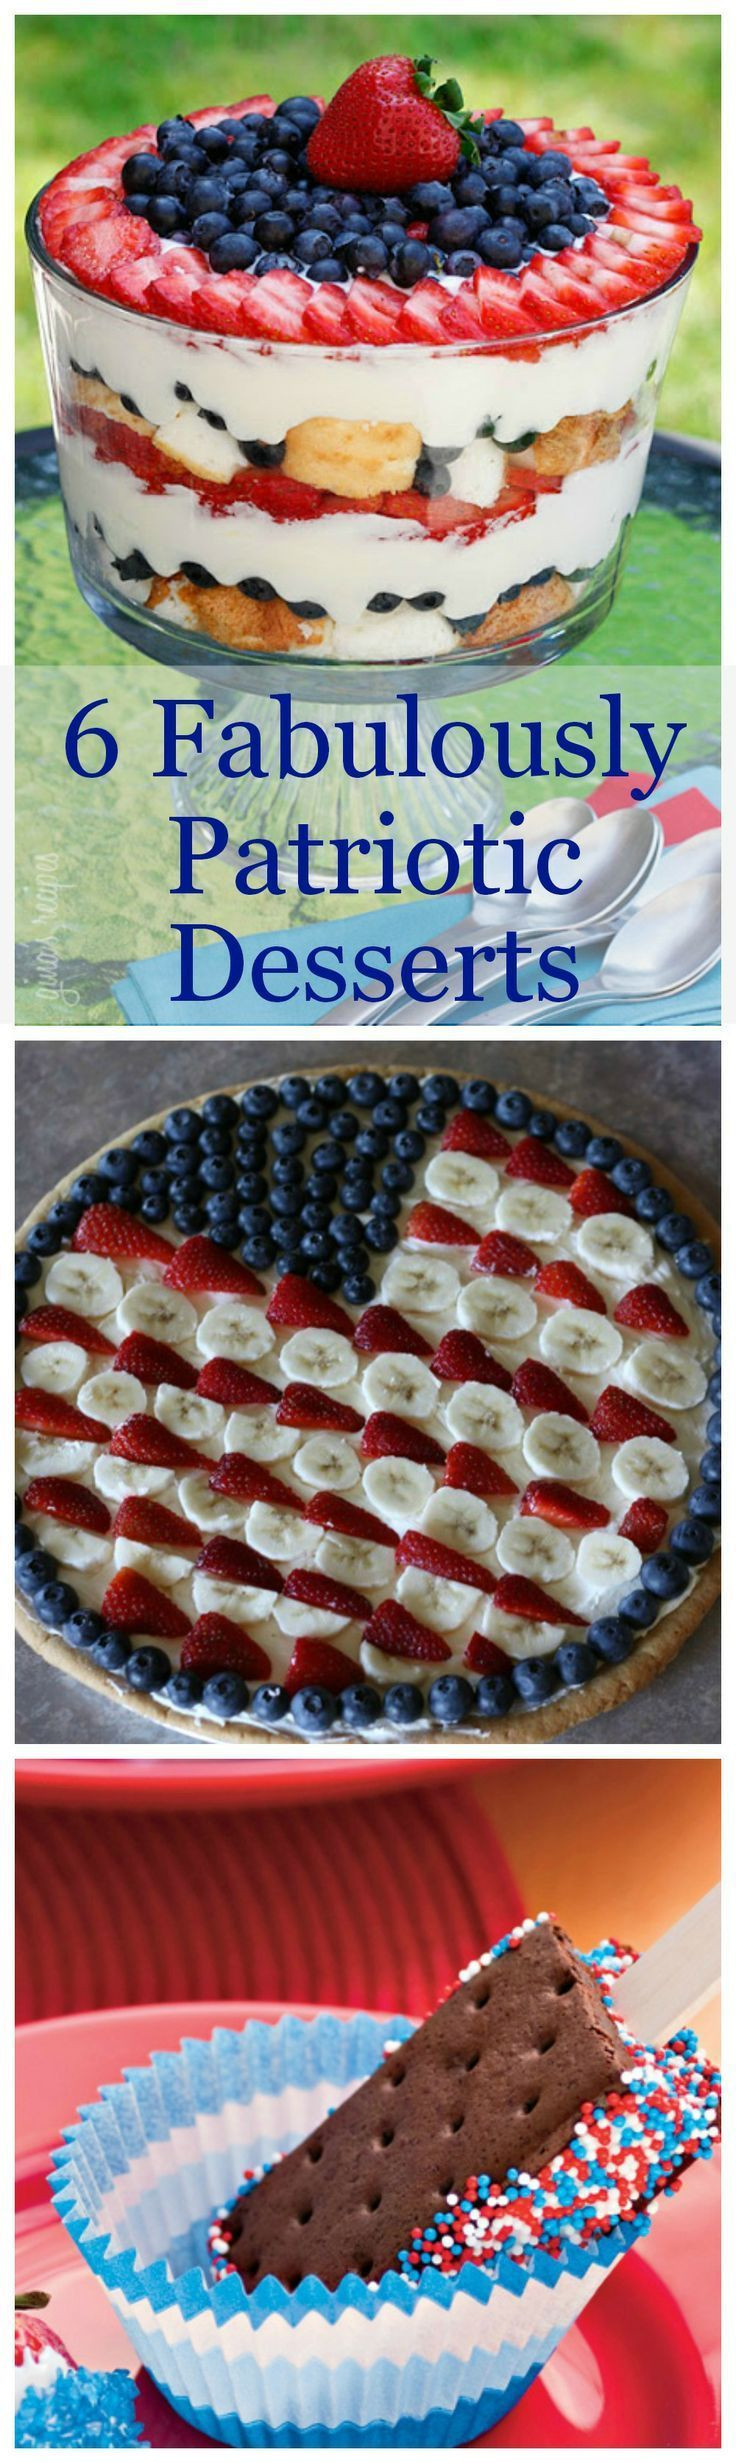 4 Of July Dessert
 10 best images about 4th of July on Pinterest